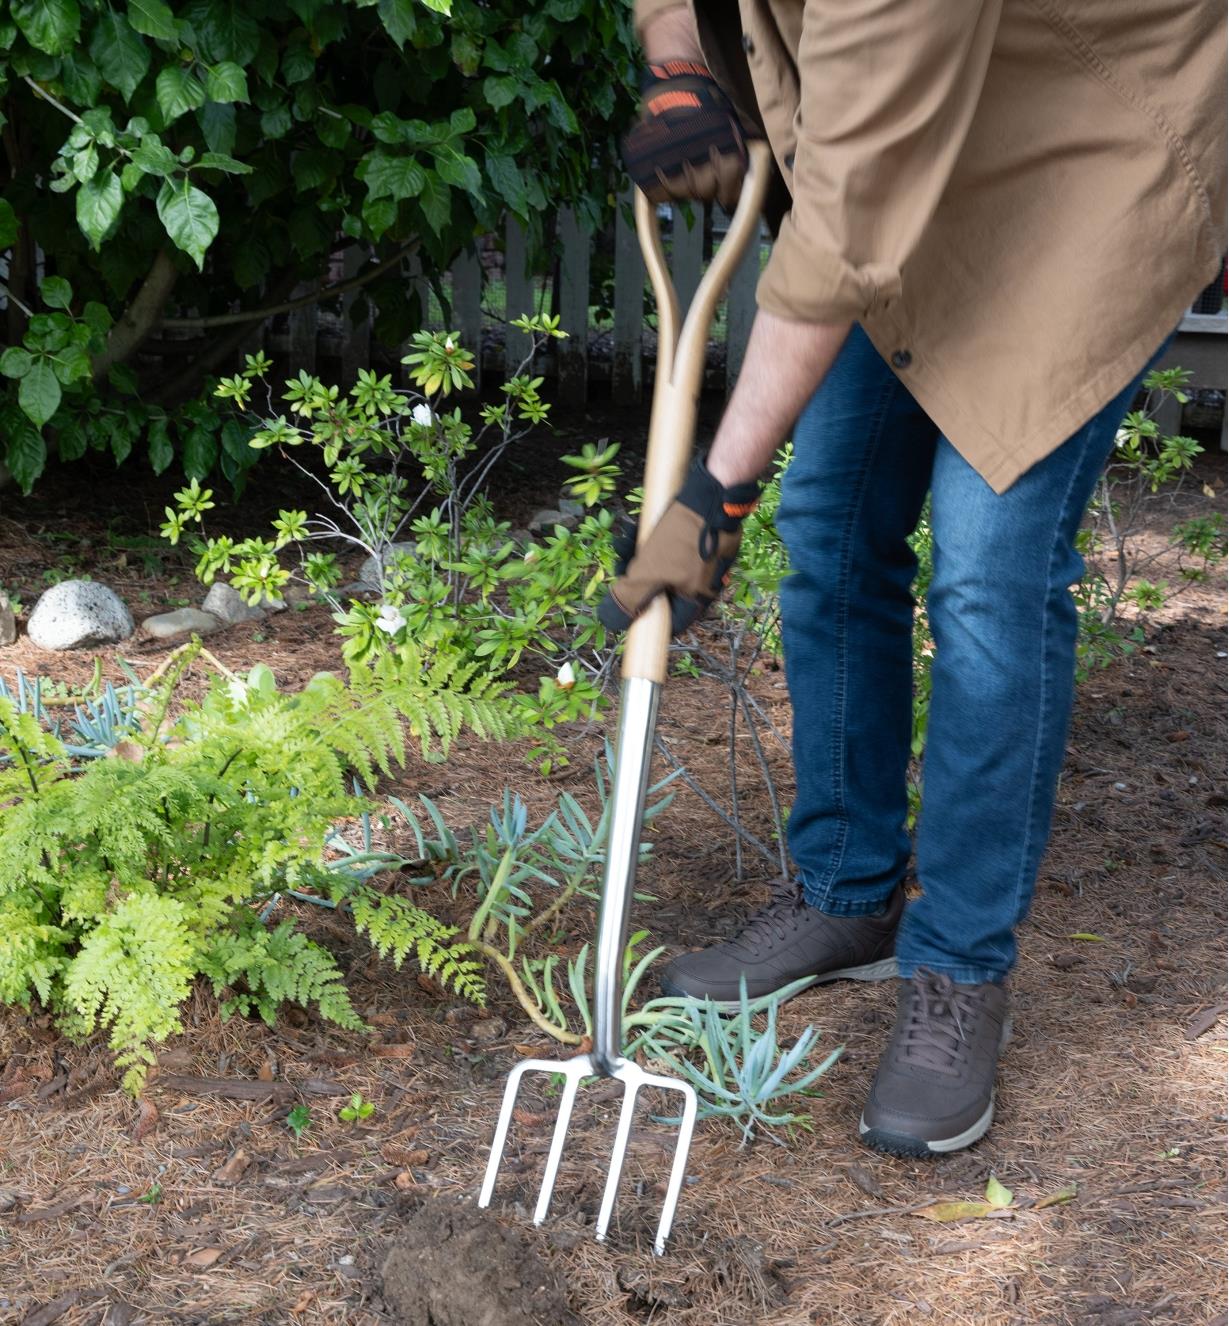 A gardener pushes the digging fork into the ground